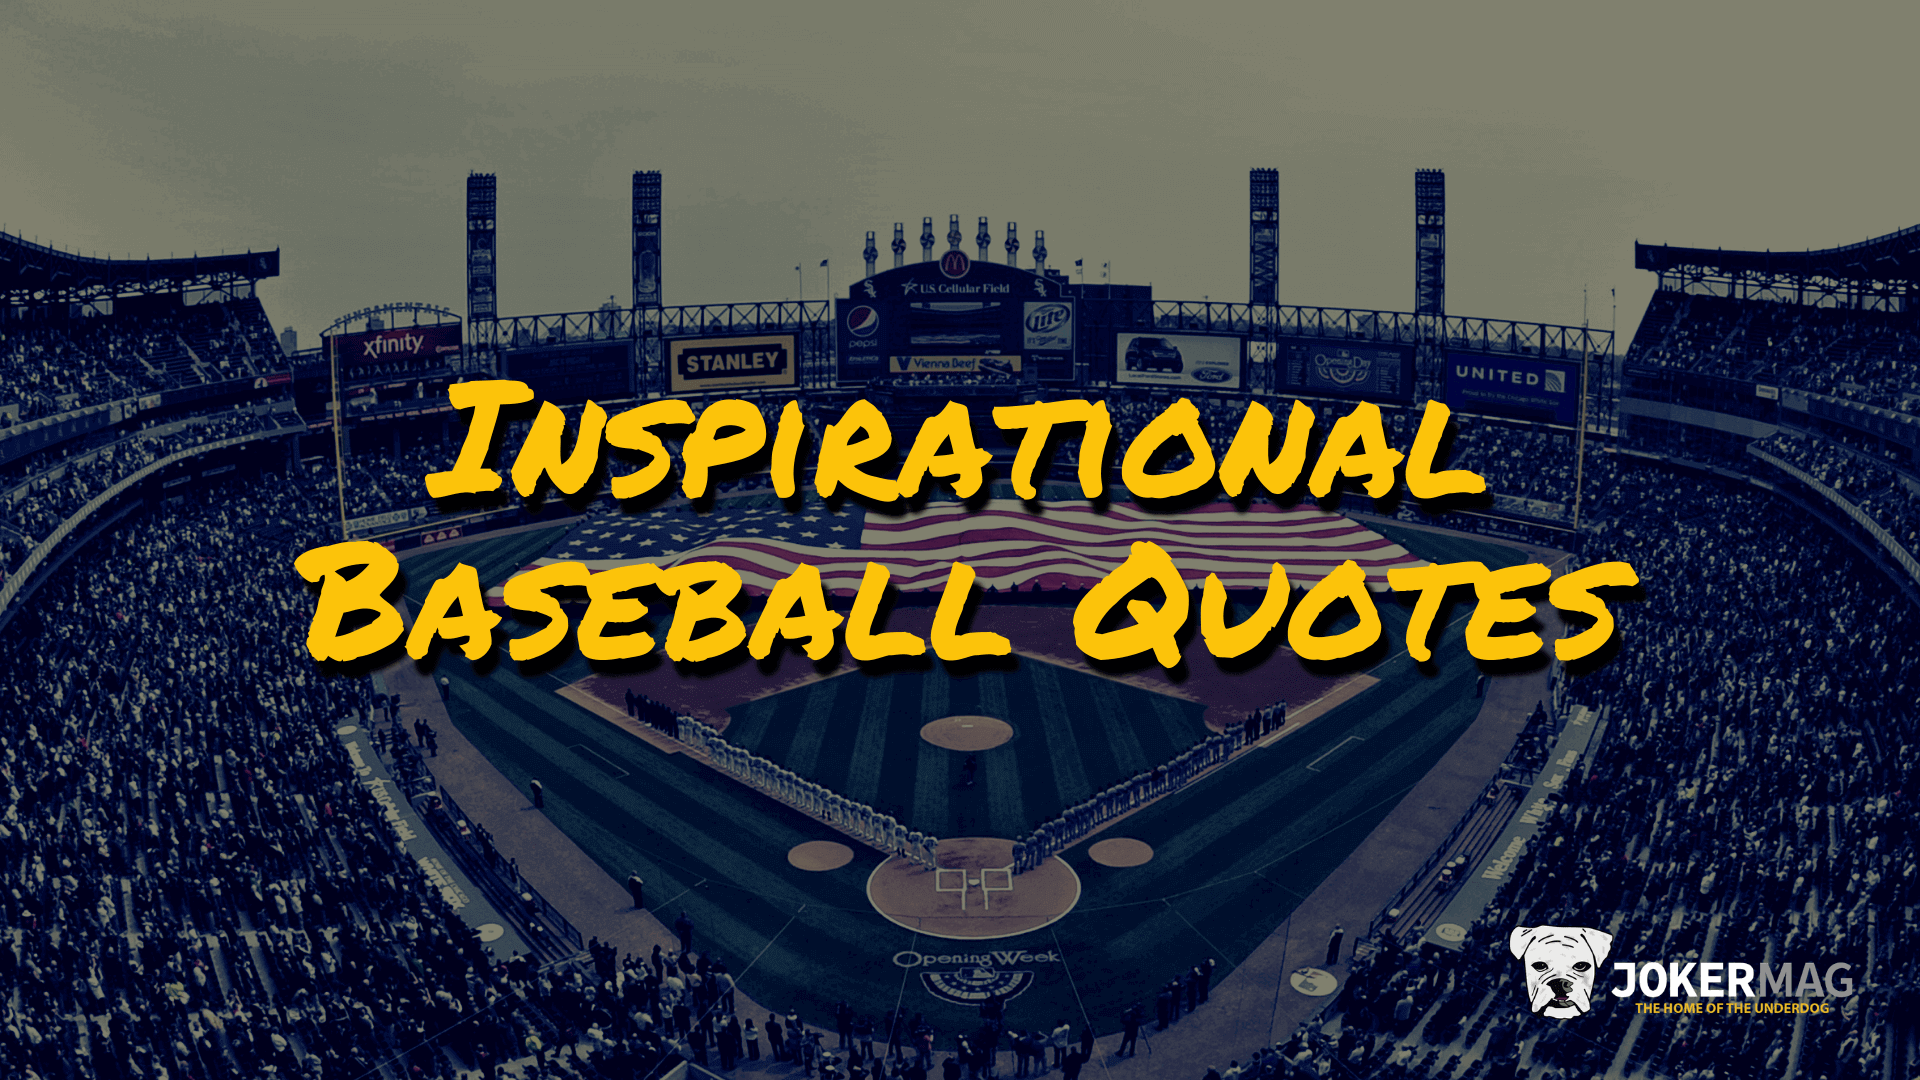 
		Inspirational baseball quotes from Hall of Famers and the best ever, by Joker Mag the home of the underdog